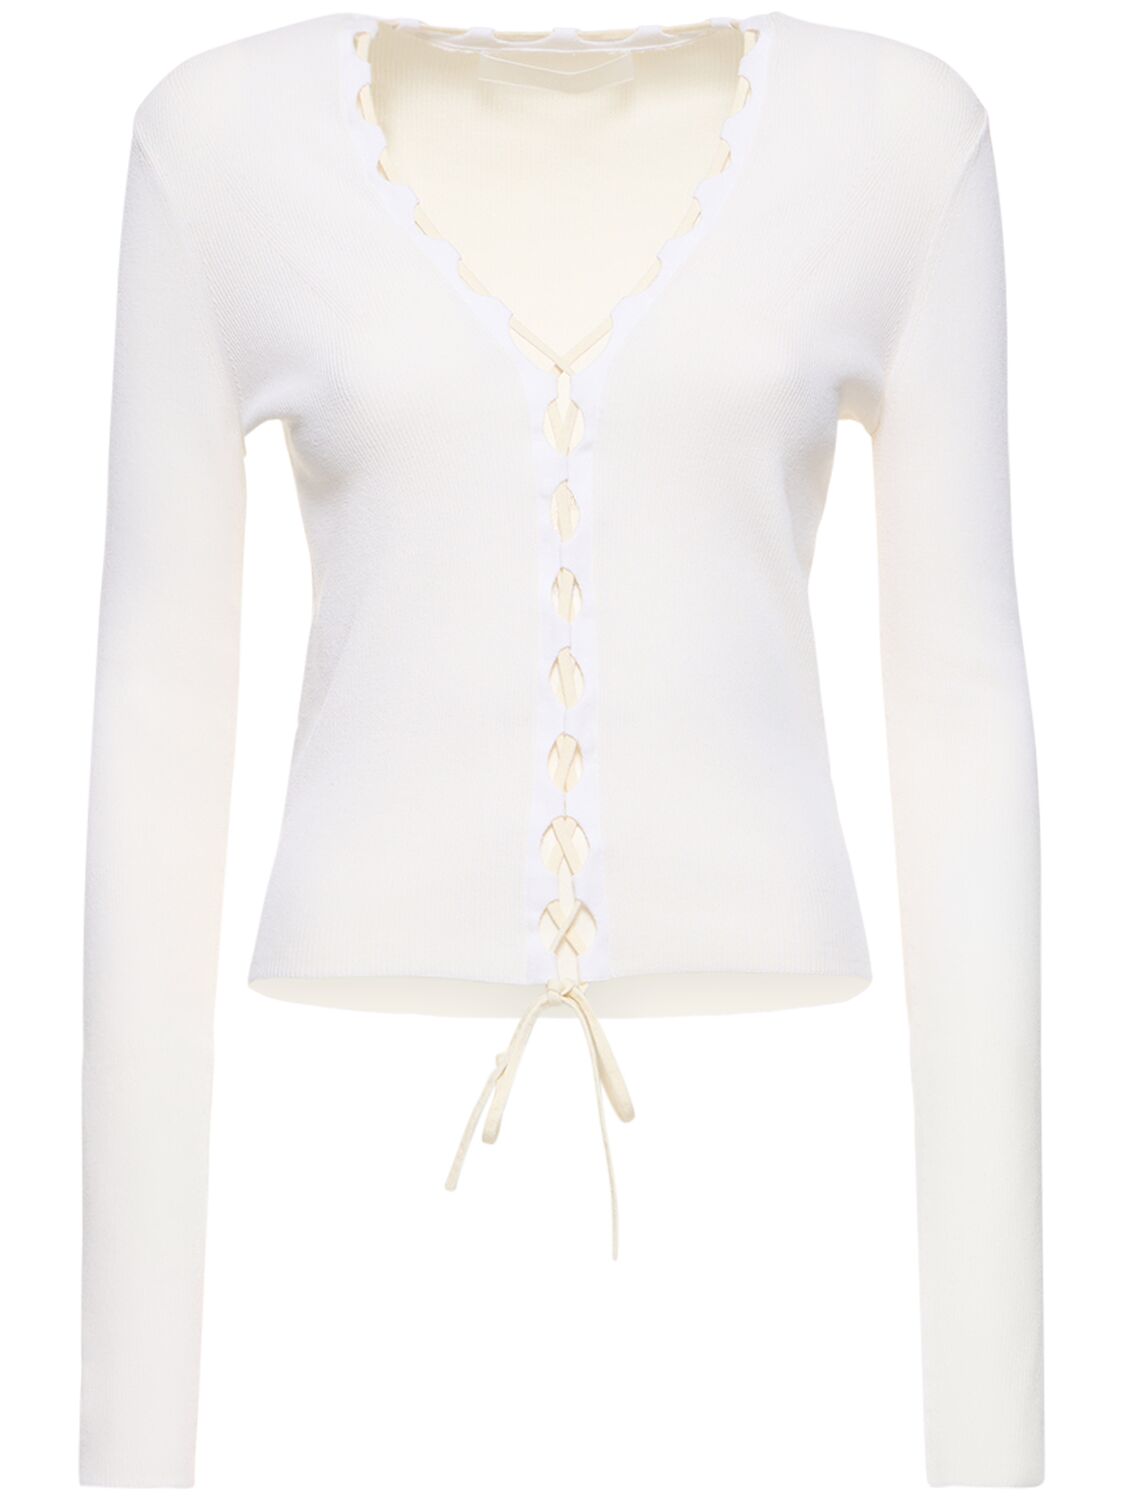 Image of Knit Cotton Crepe Cardigan Top